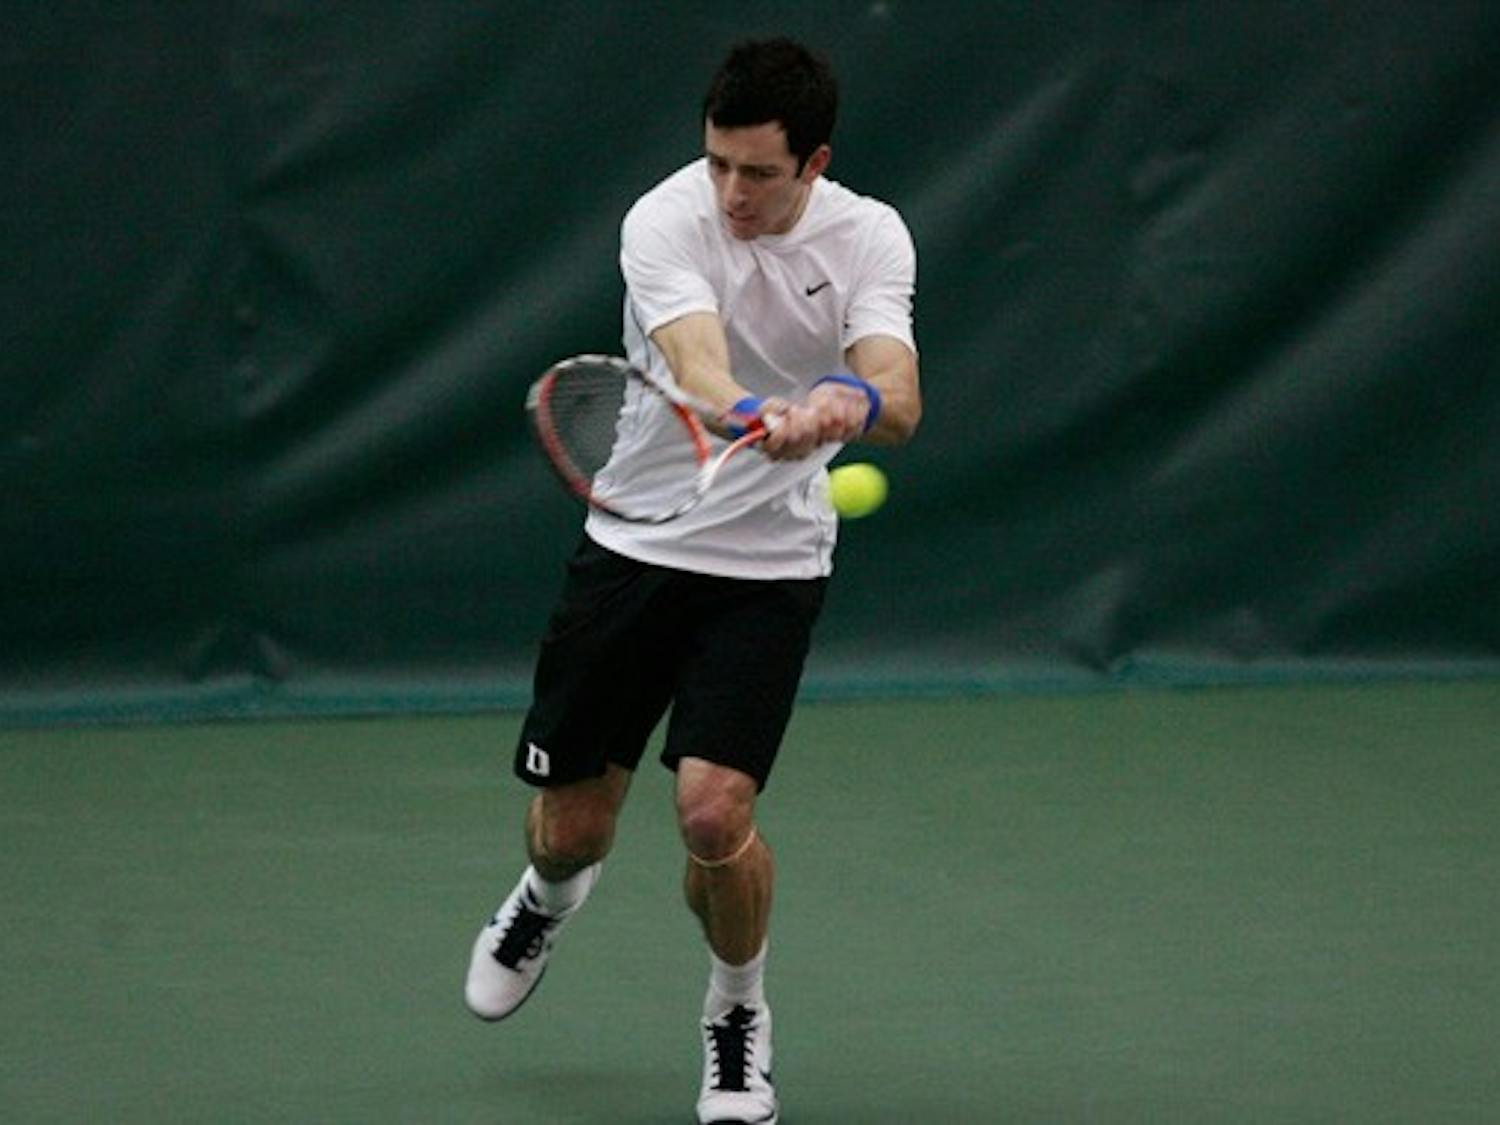 Henrique Cunha injured his pinky finger in doubles play and sat out in singles as Duke fell 4-3.